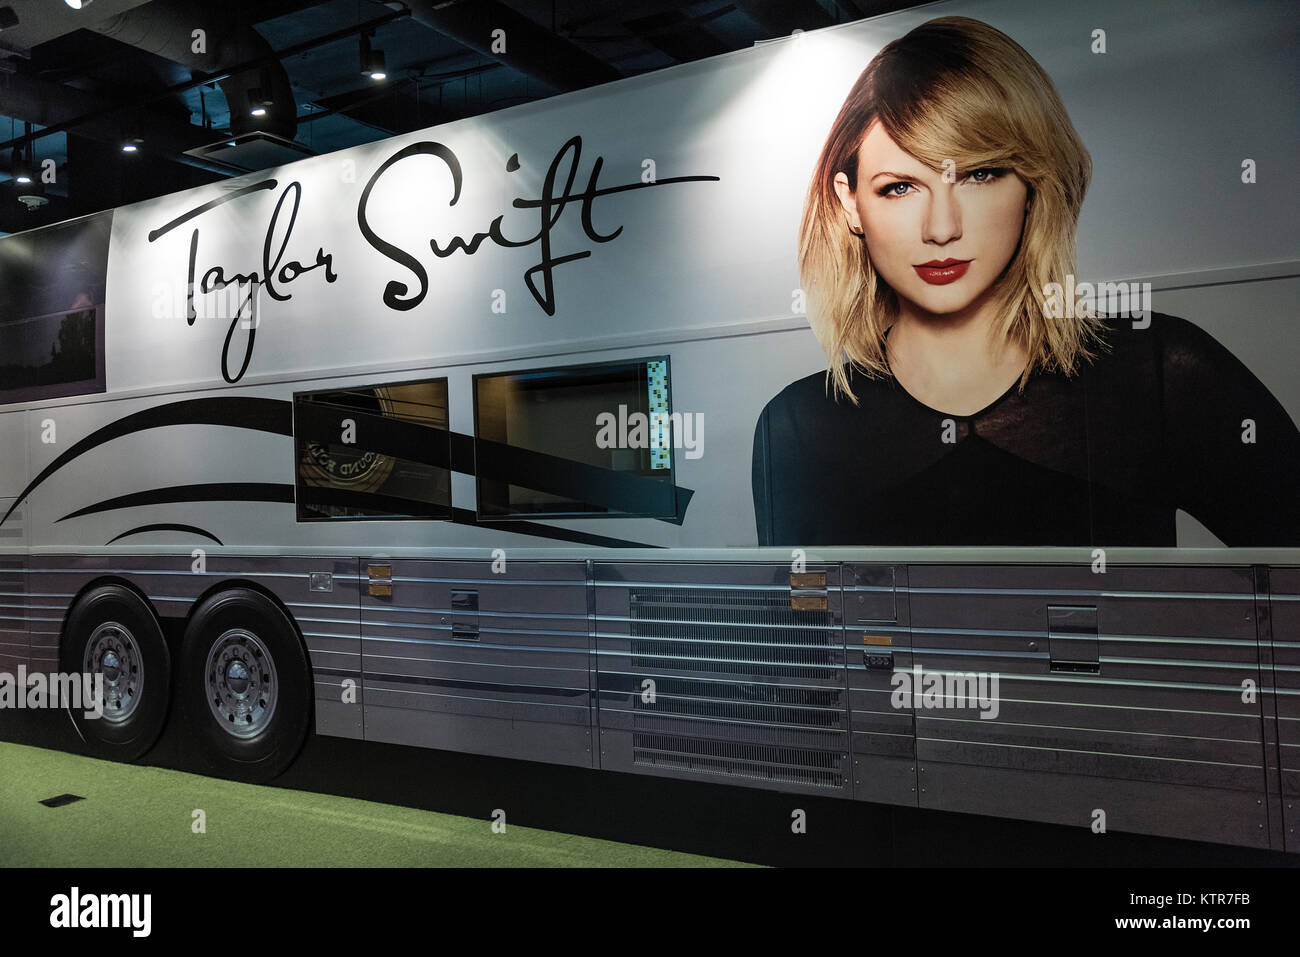 Taylor Swift tour bus exposición, Country Music Hall of Fame, Nashville, Tennessee, EE.UU. Foto de stock